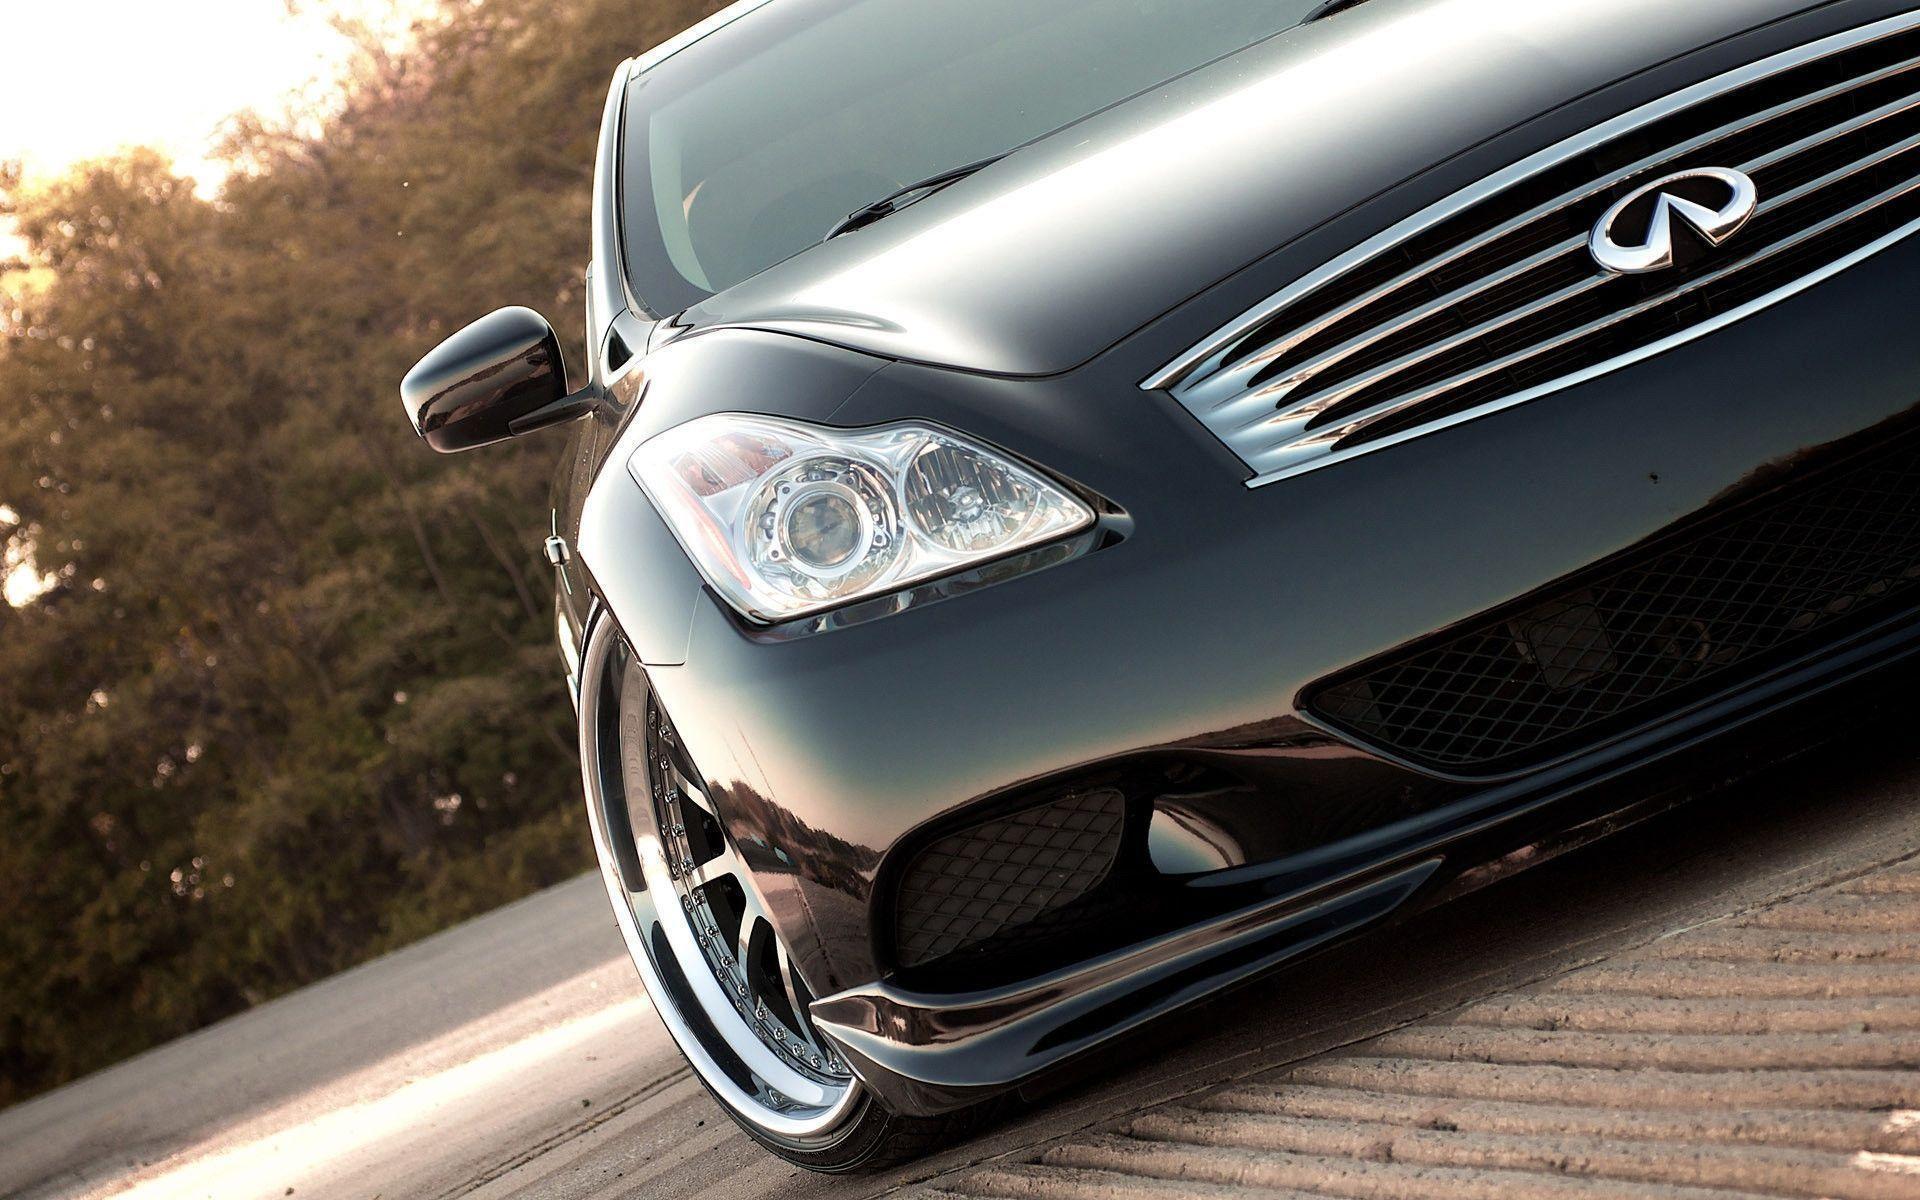 2012 Infiniti G37 Coupe Wallpapers HD  DriveSpark